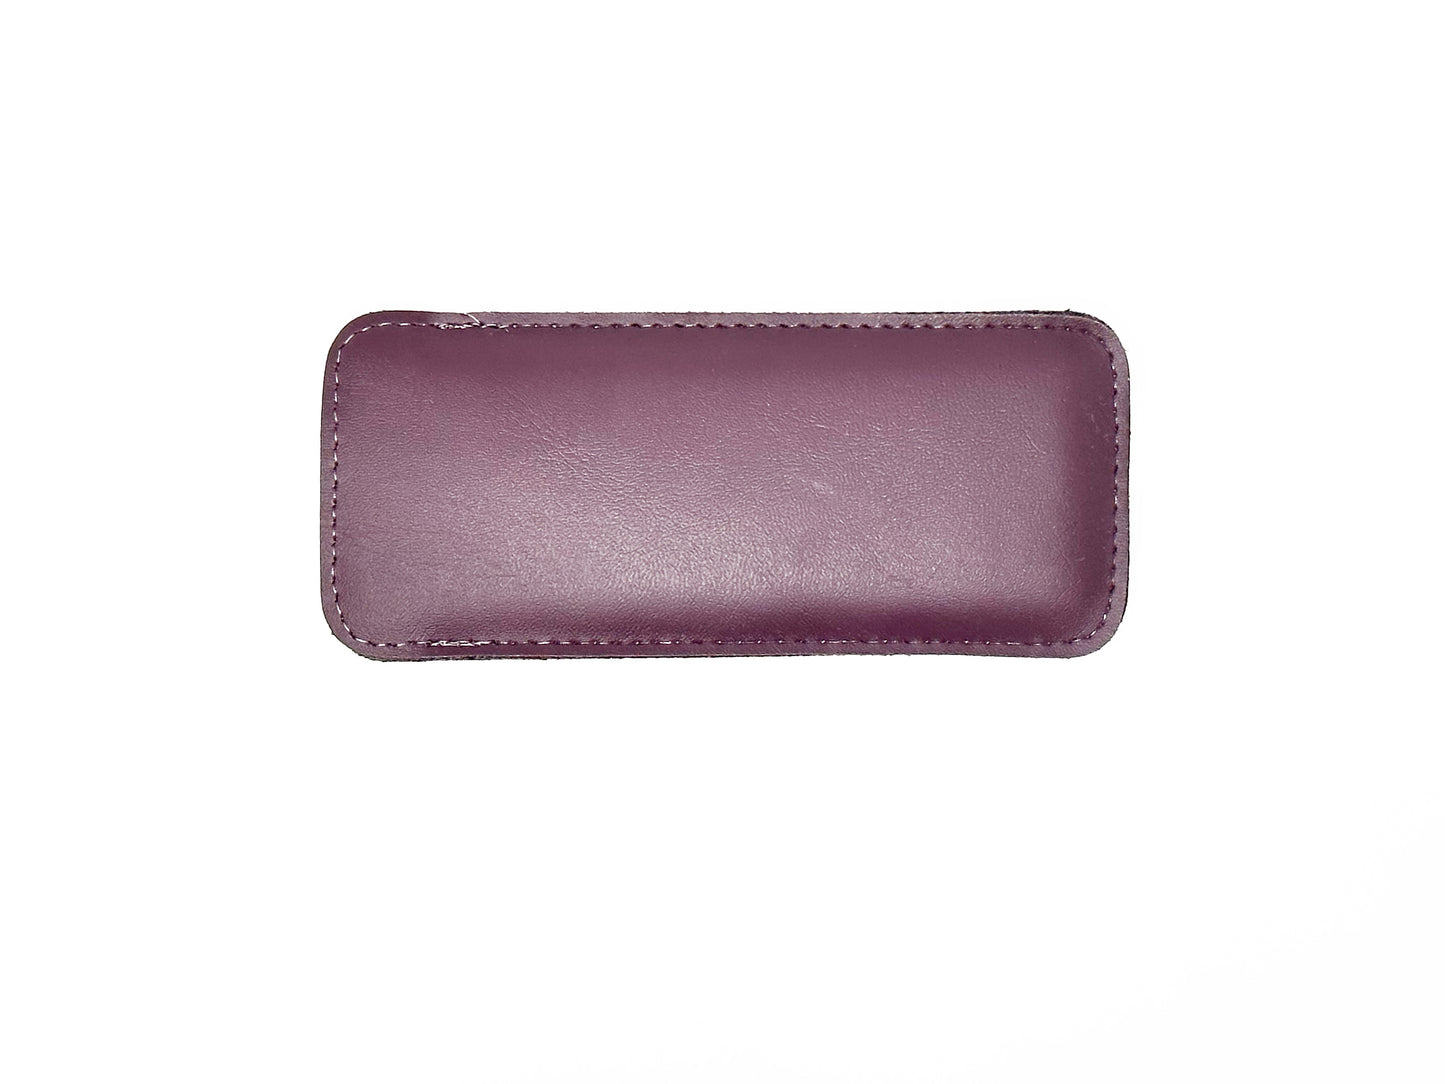 Thin, compact leather slip-in case in Burgundy.